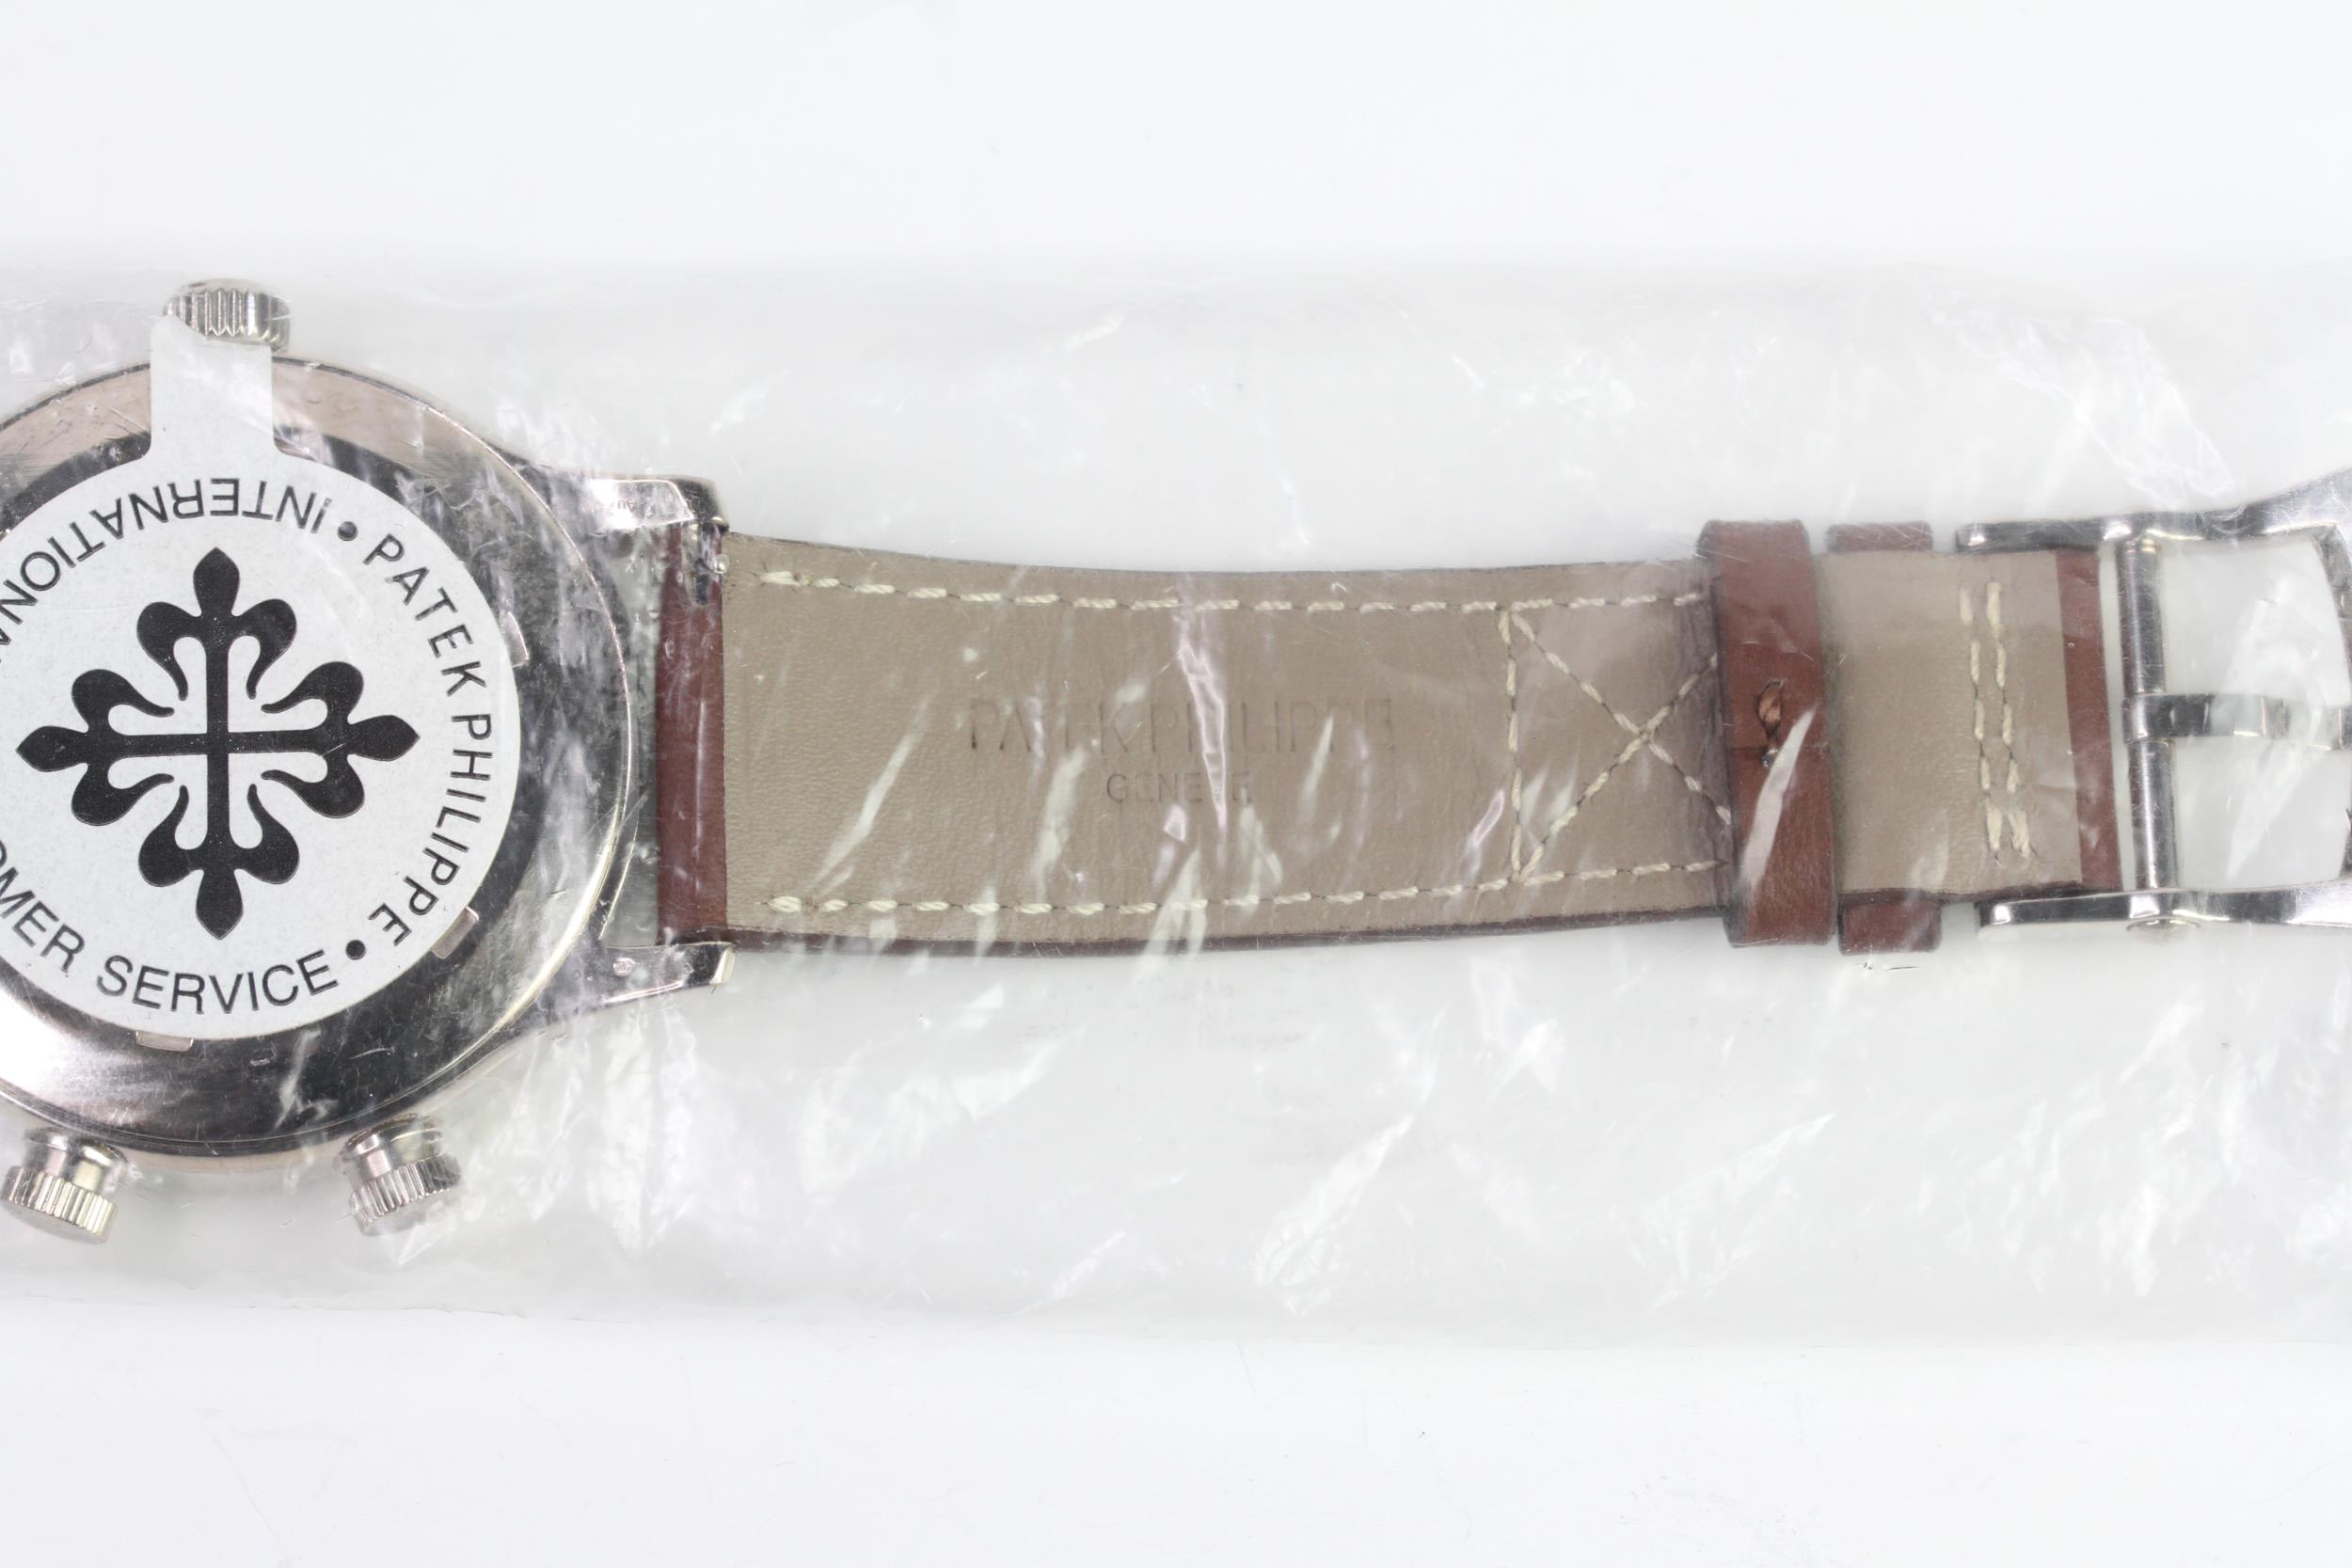 A FINE PATEK PHILIPPE CALATRAVA PILOT TRAVEL TIME REFERENCE 5224G-001, SEALED FROM SERVICE, WITH BOX - Image 10 of 19